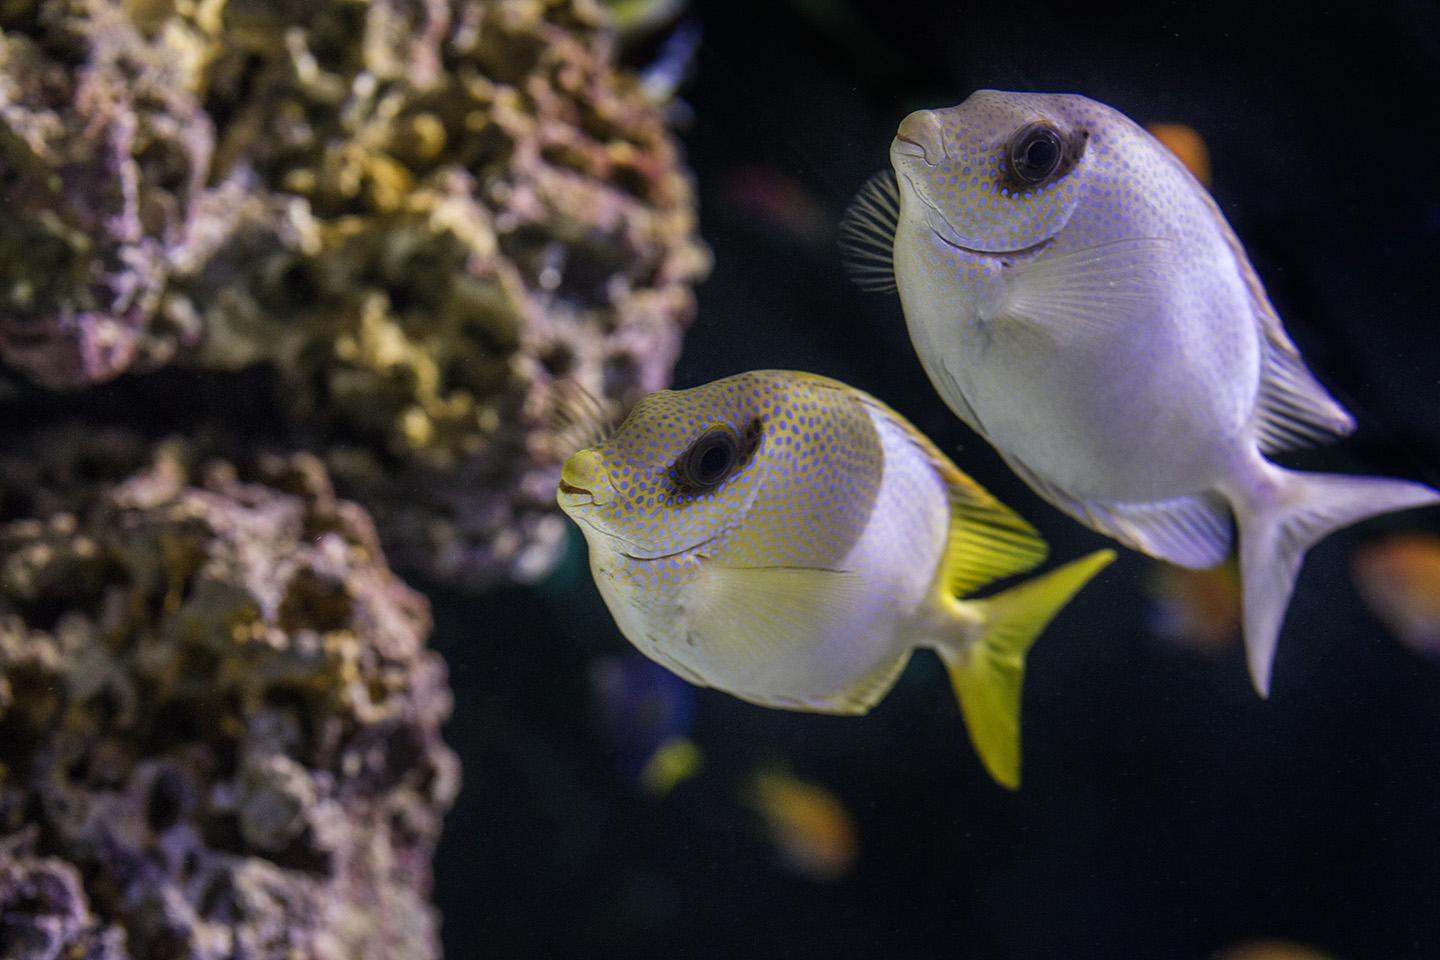  Shedd  s New Exhibit to Showcase Underwater Beauty With 